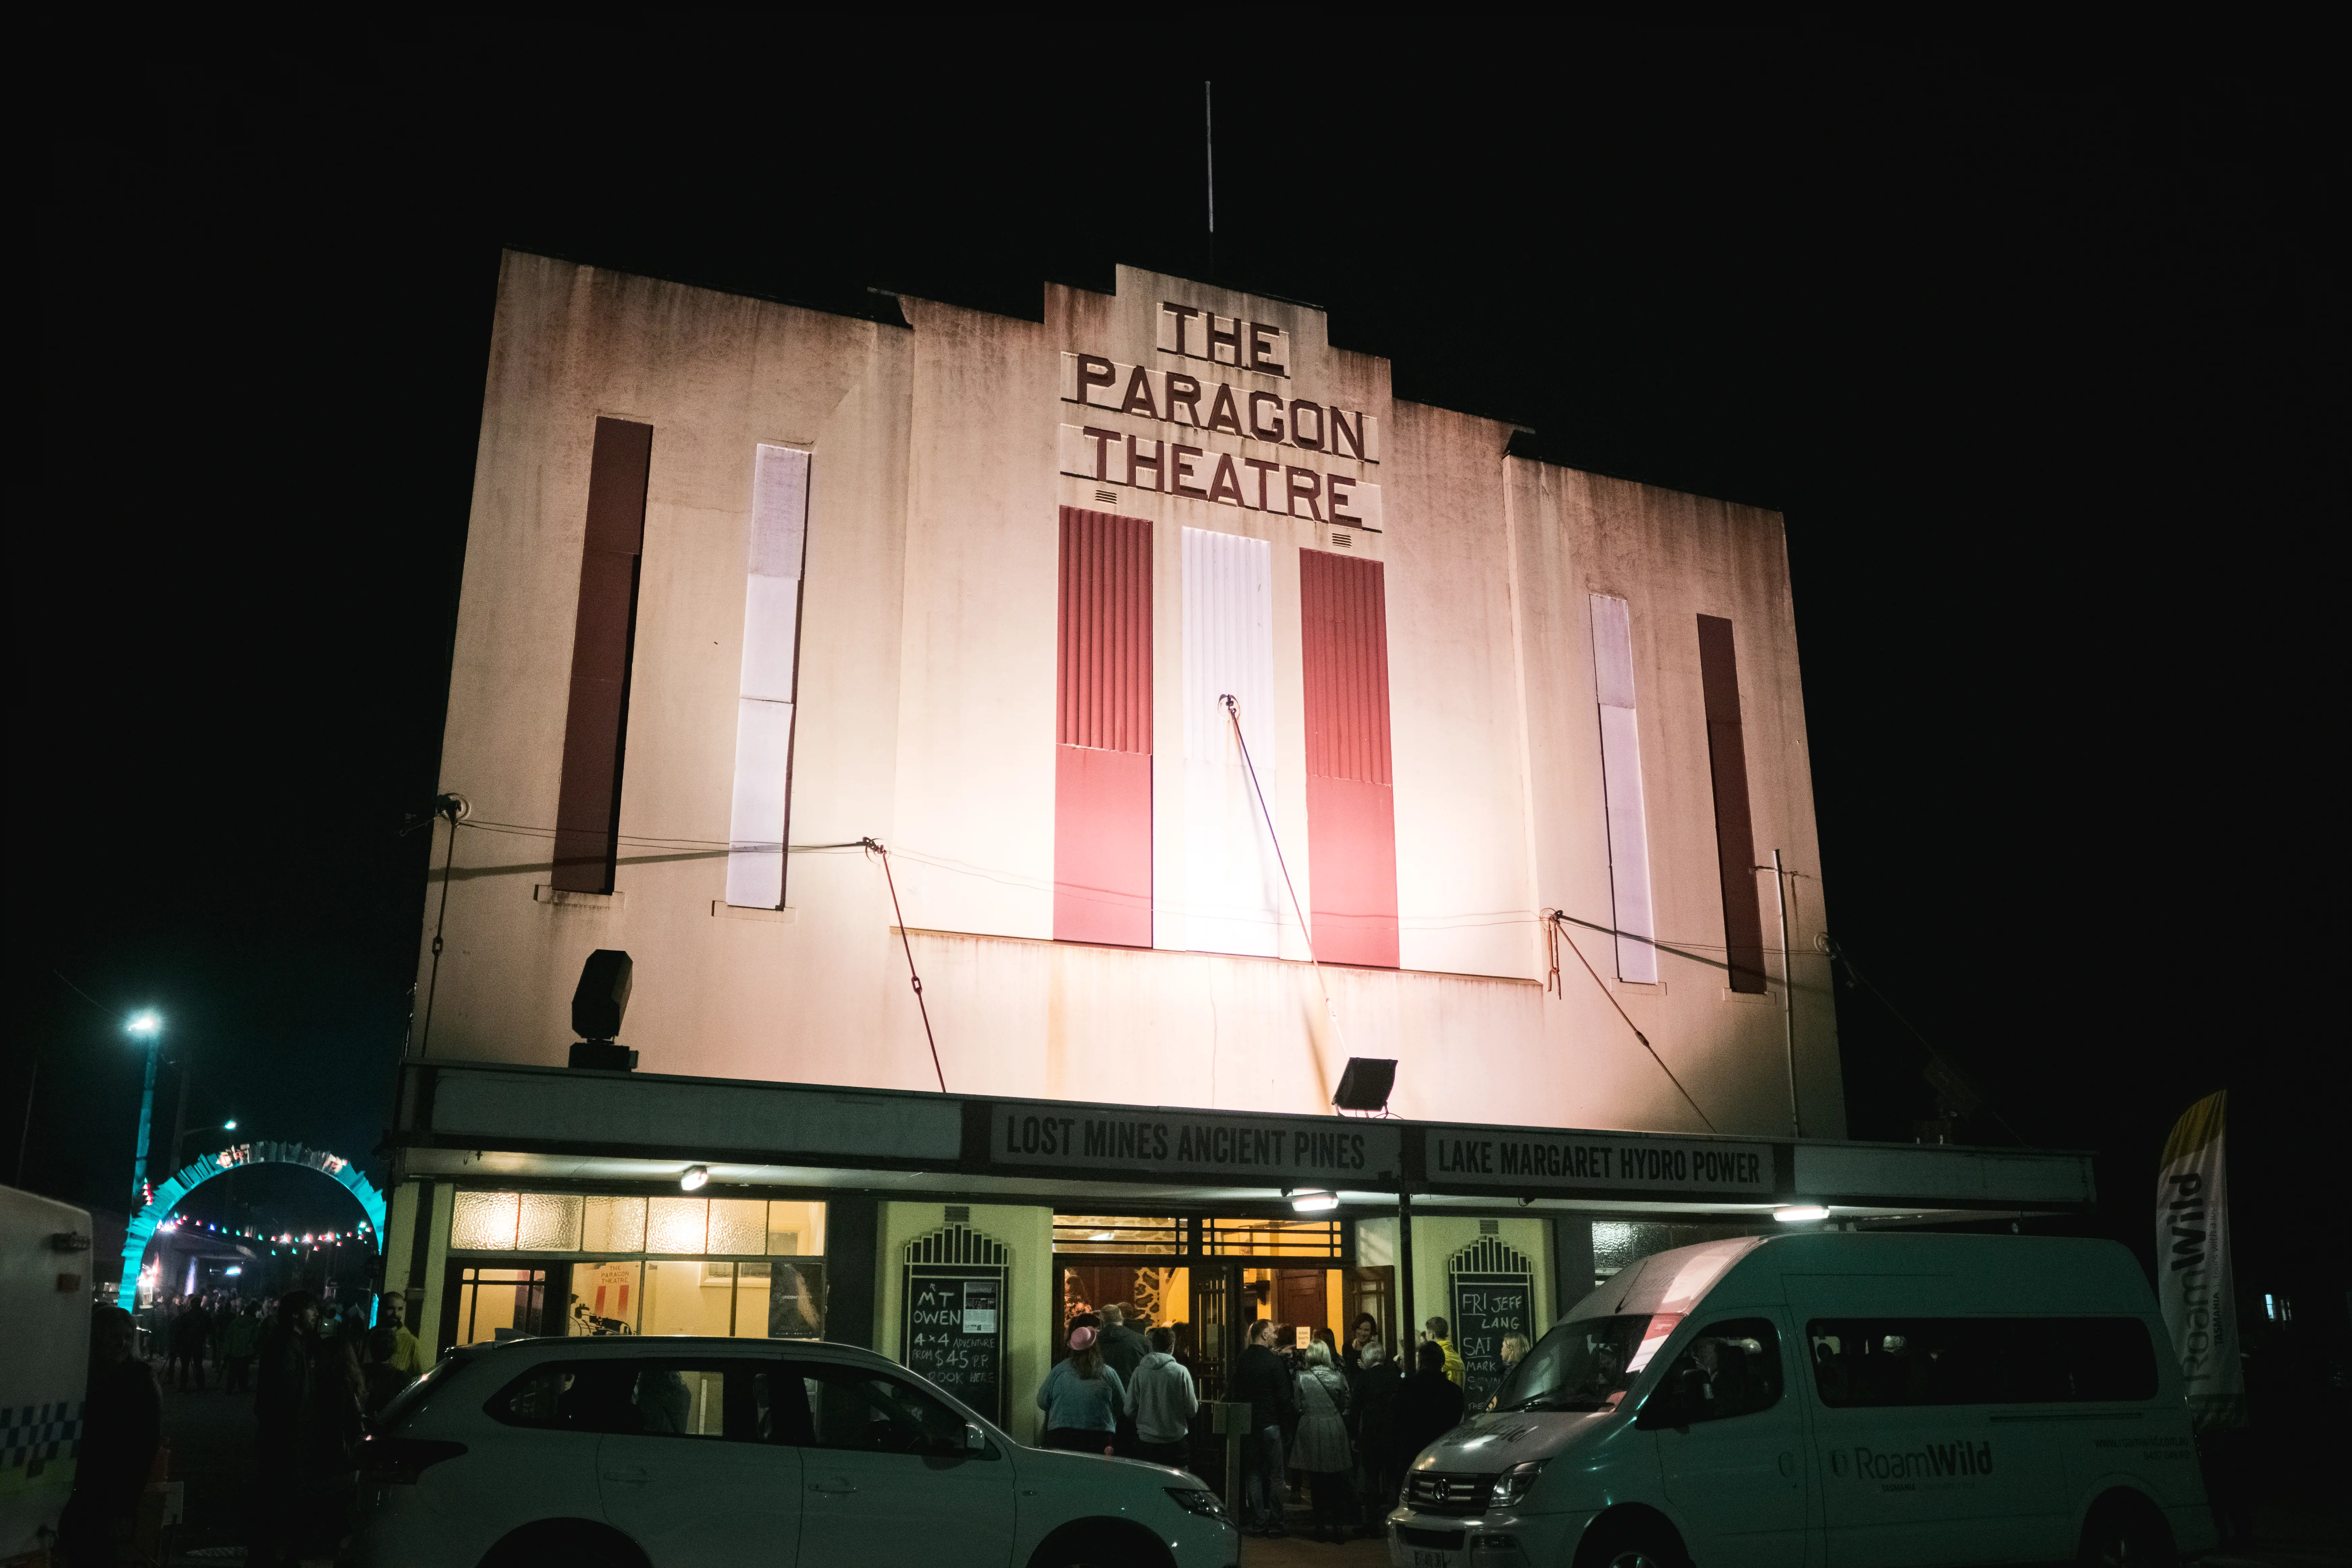 The tall, art-deco style facade of the Paragon Theatre is lit from below at night.